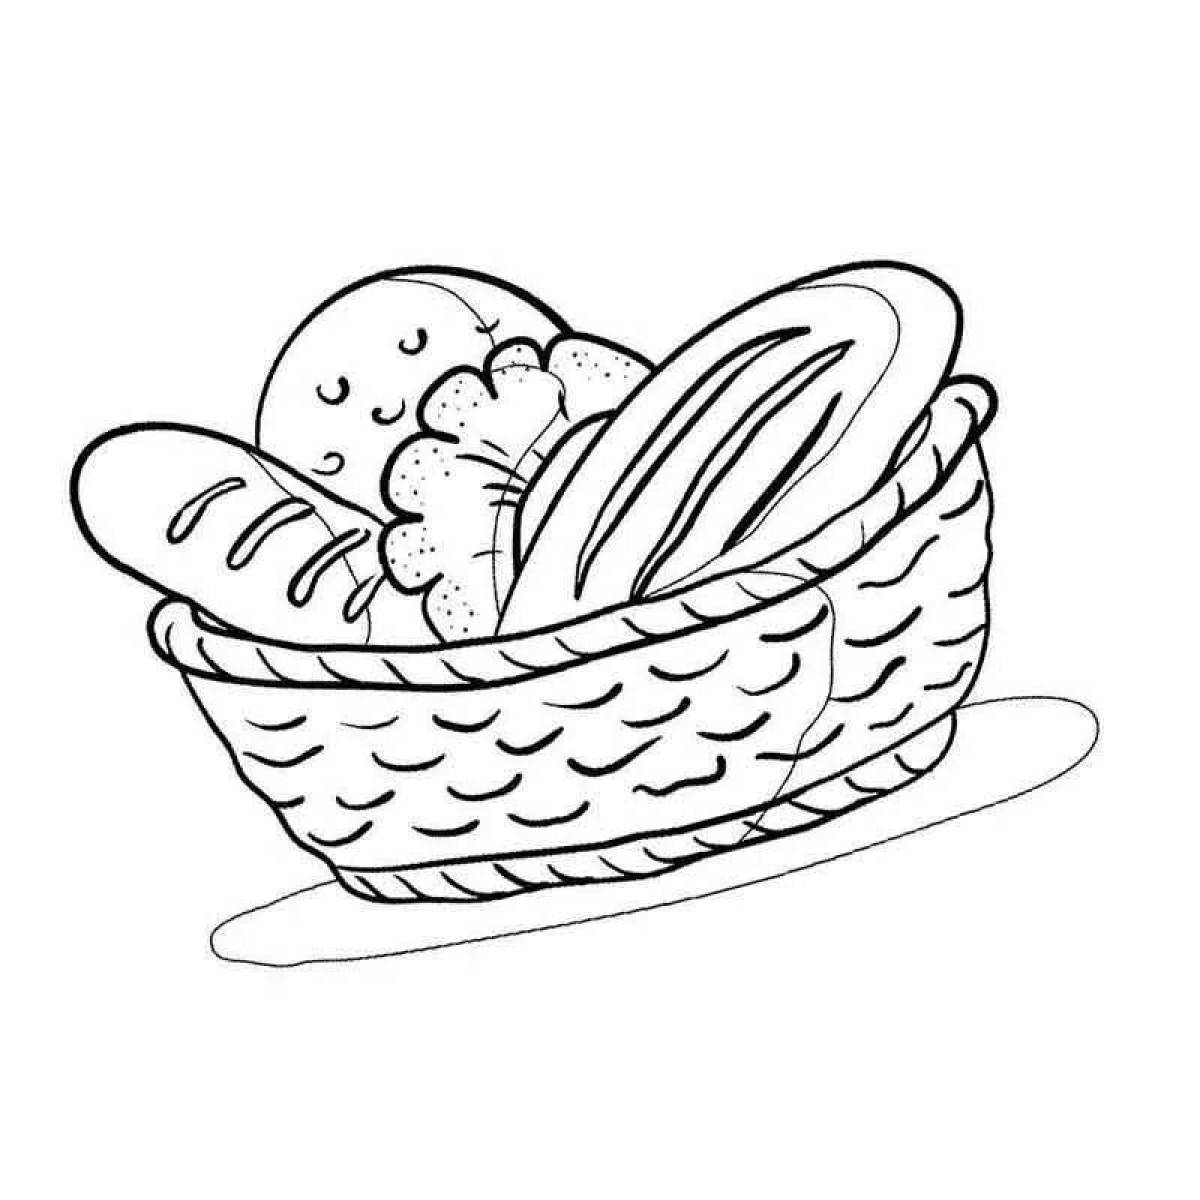 Bright bakery coloring for kids